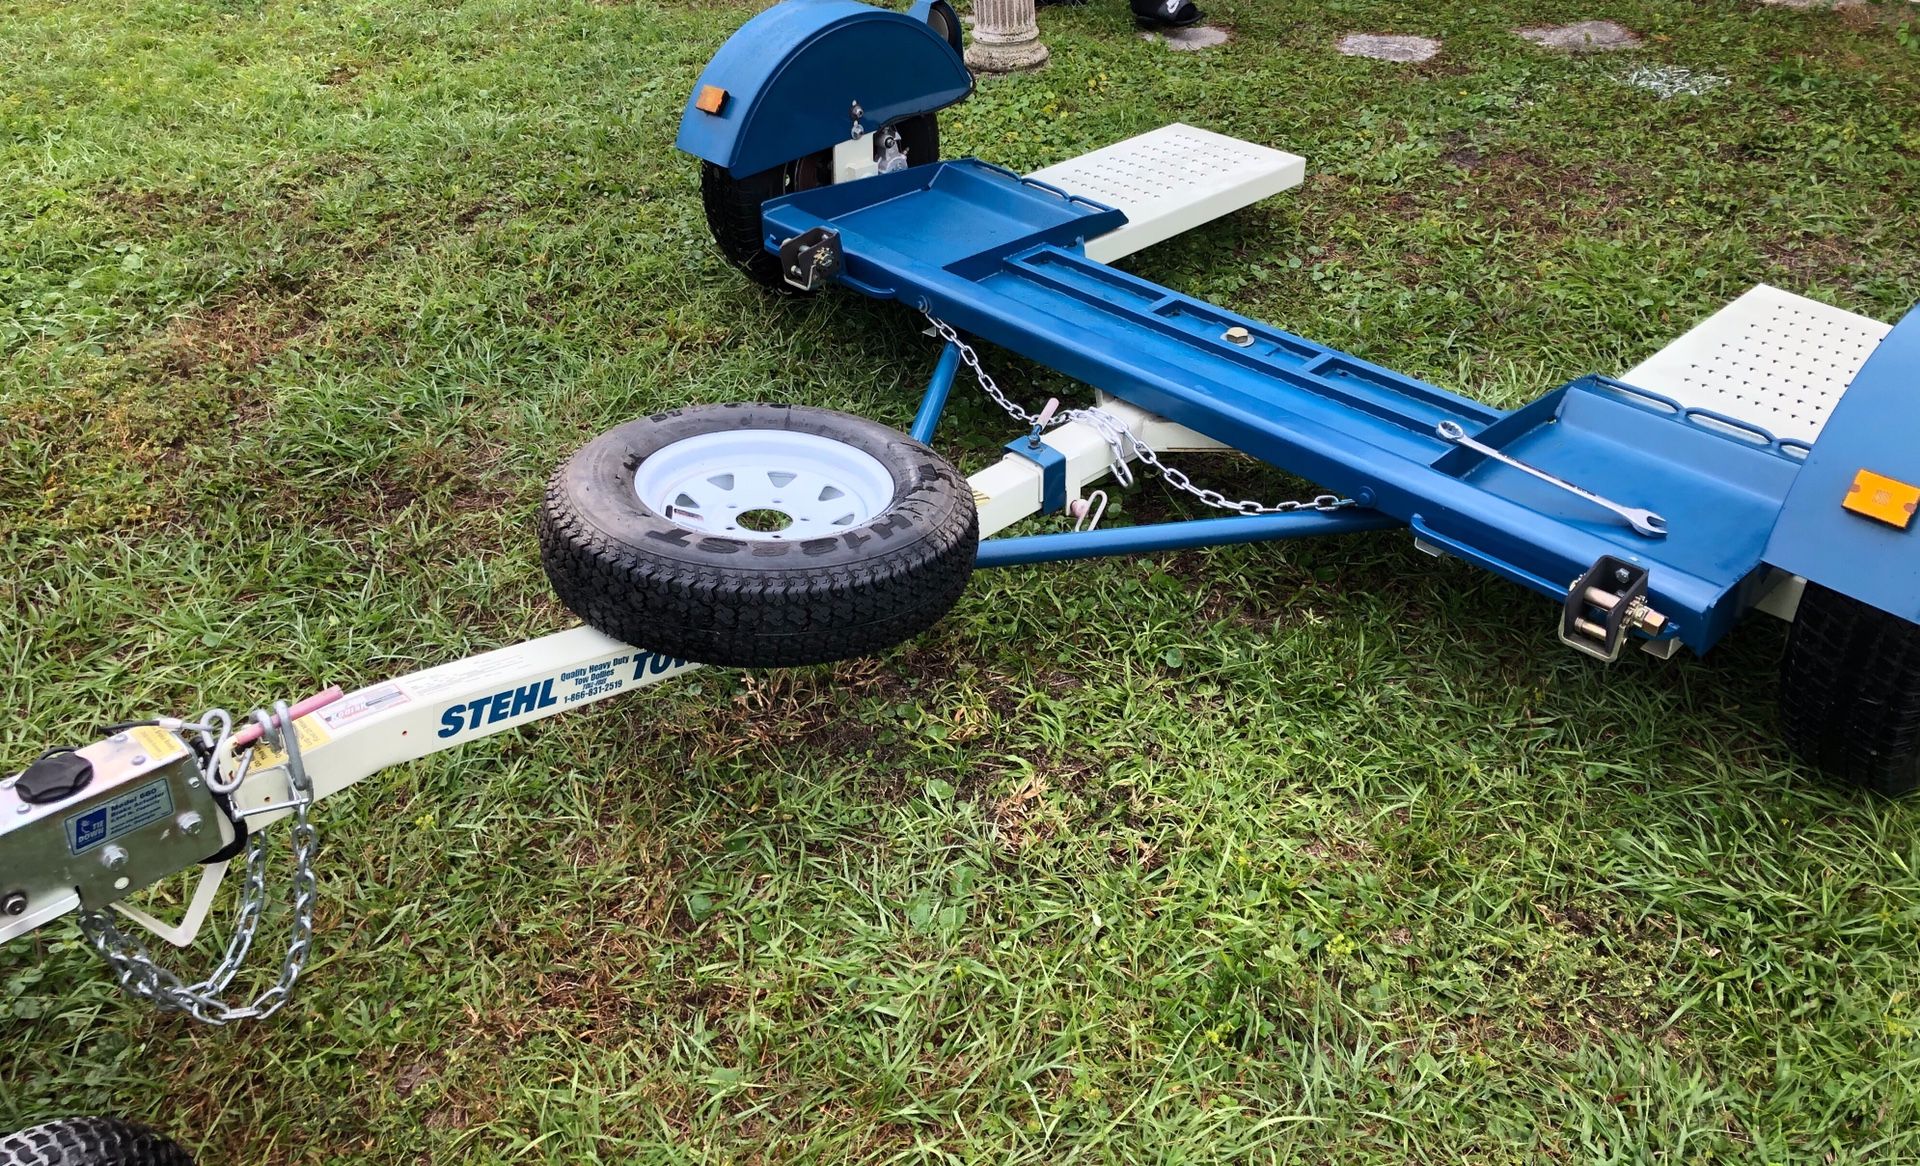 -Tow dolly with surge brakes-